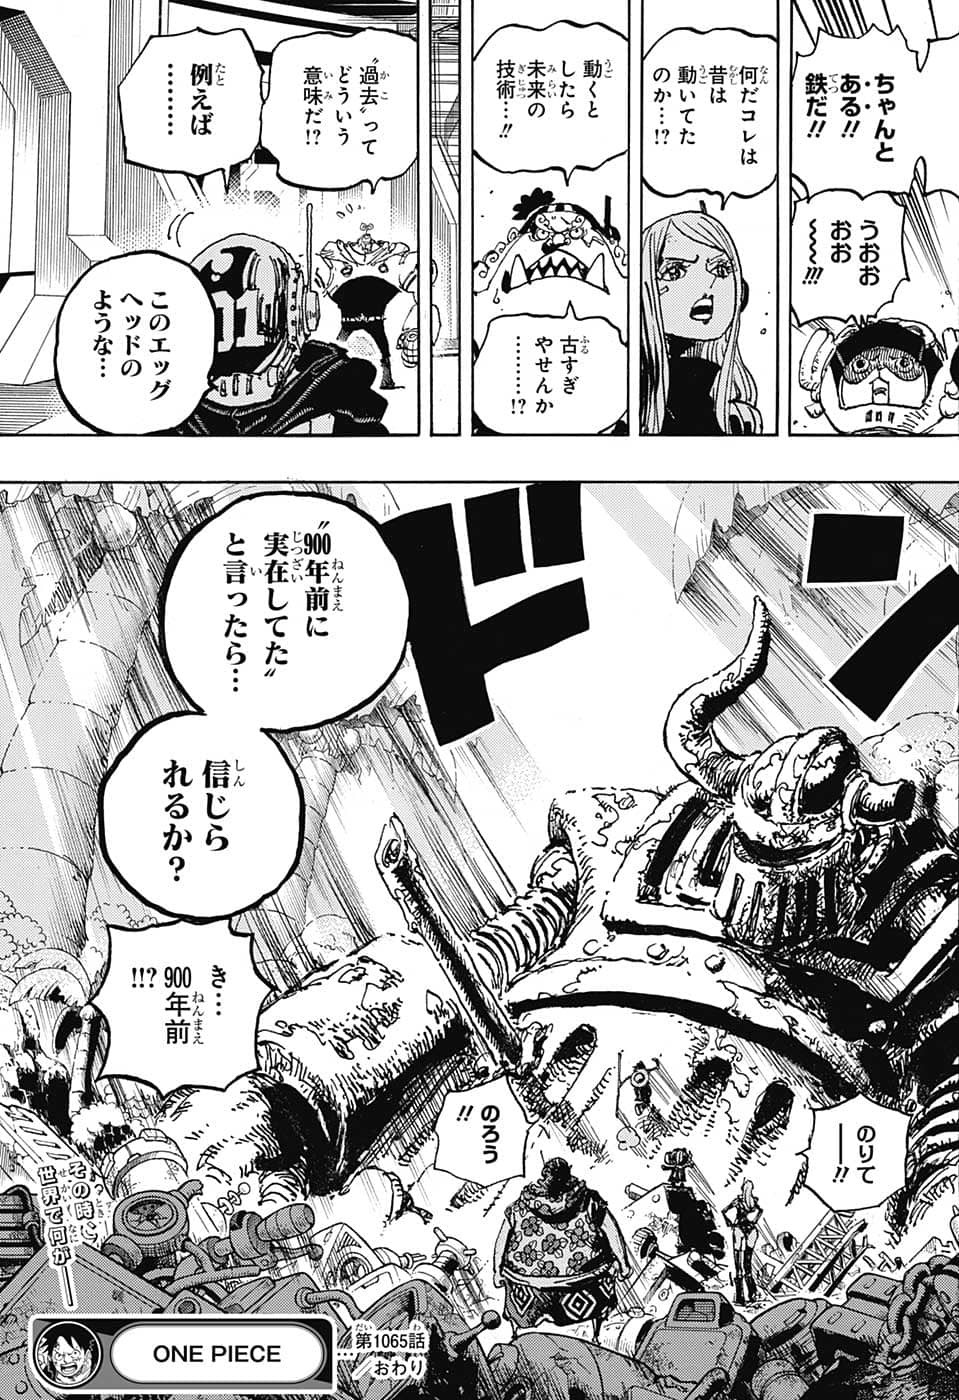 One Piece - Chapter 1065 - Page 20